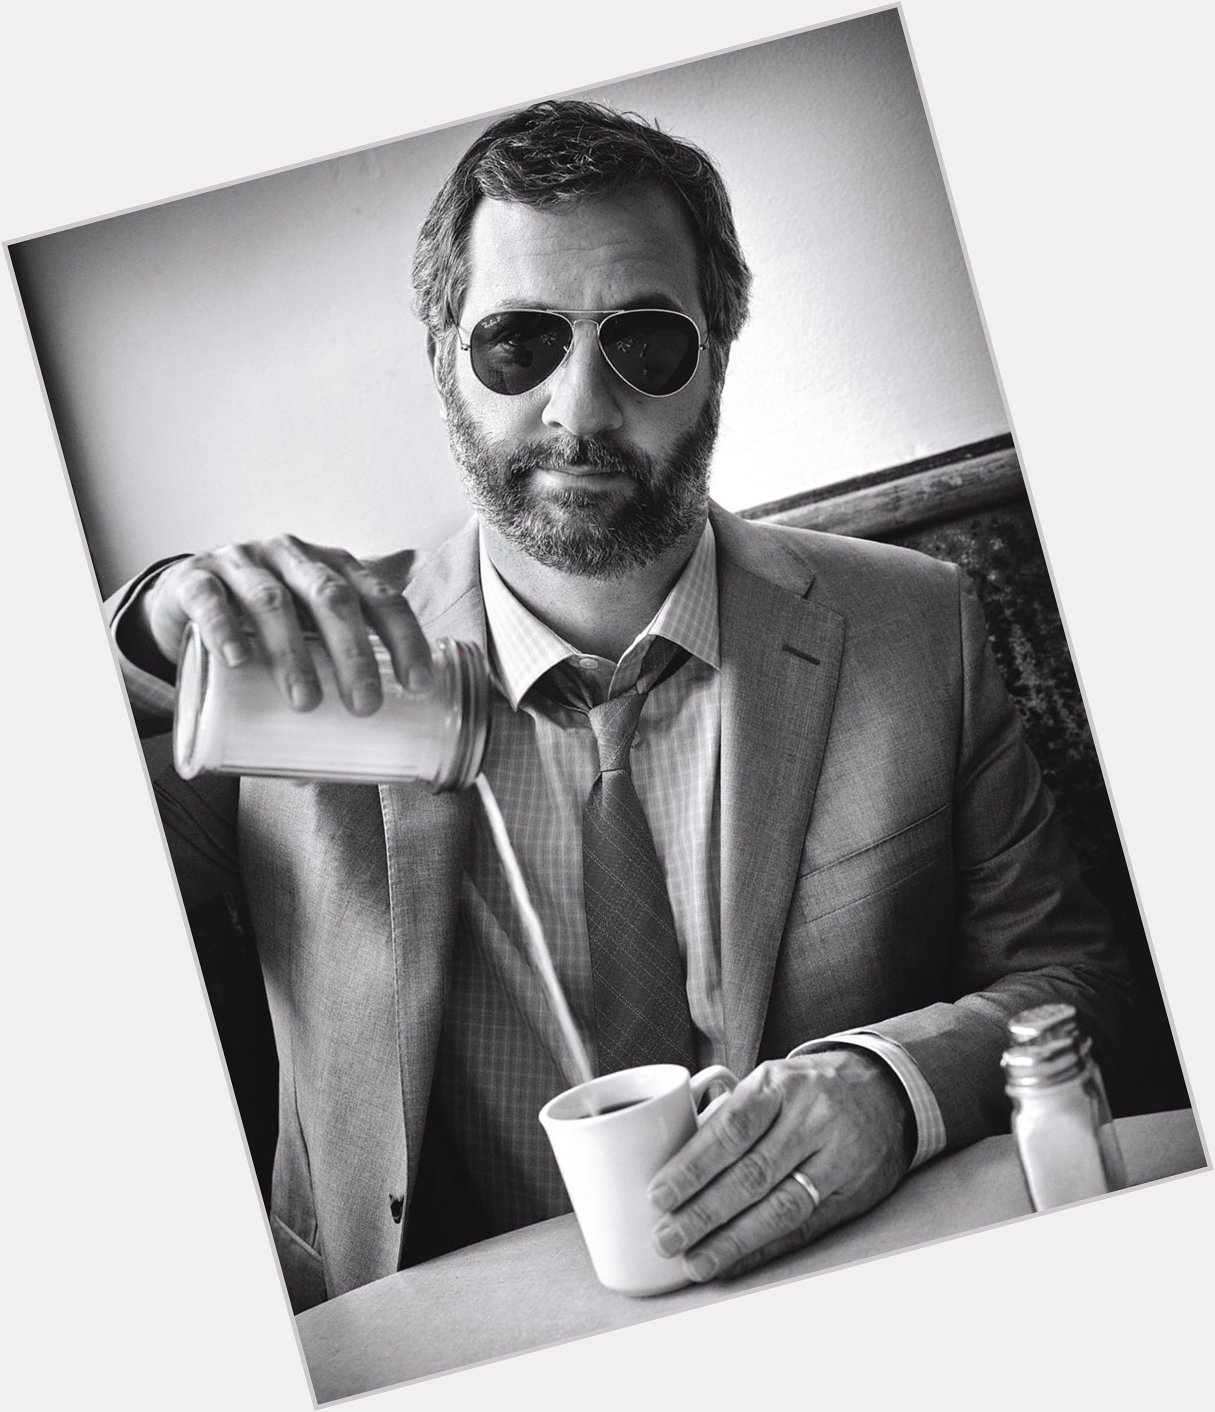 Happy Birthday to Judd Apatow, who turns 48 today! 